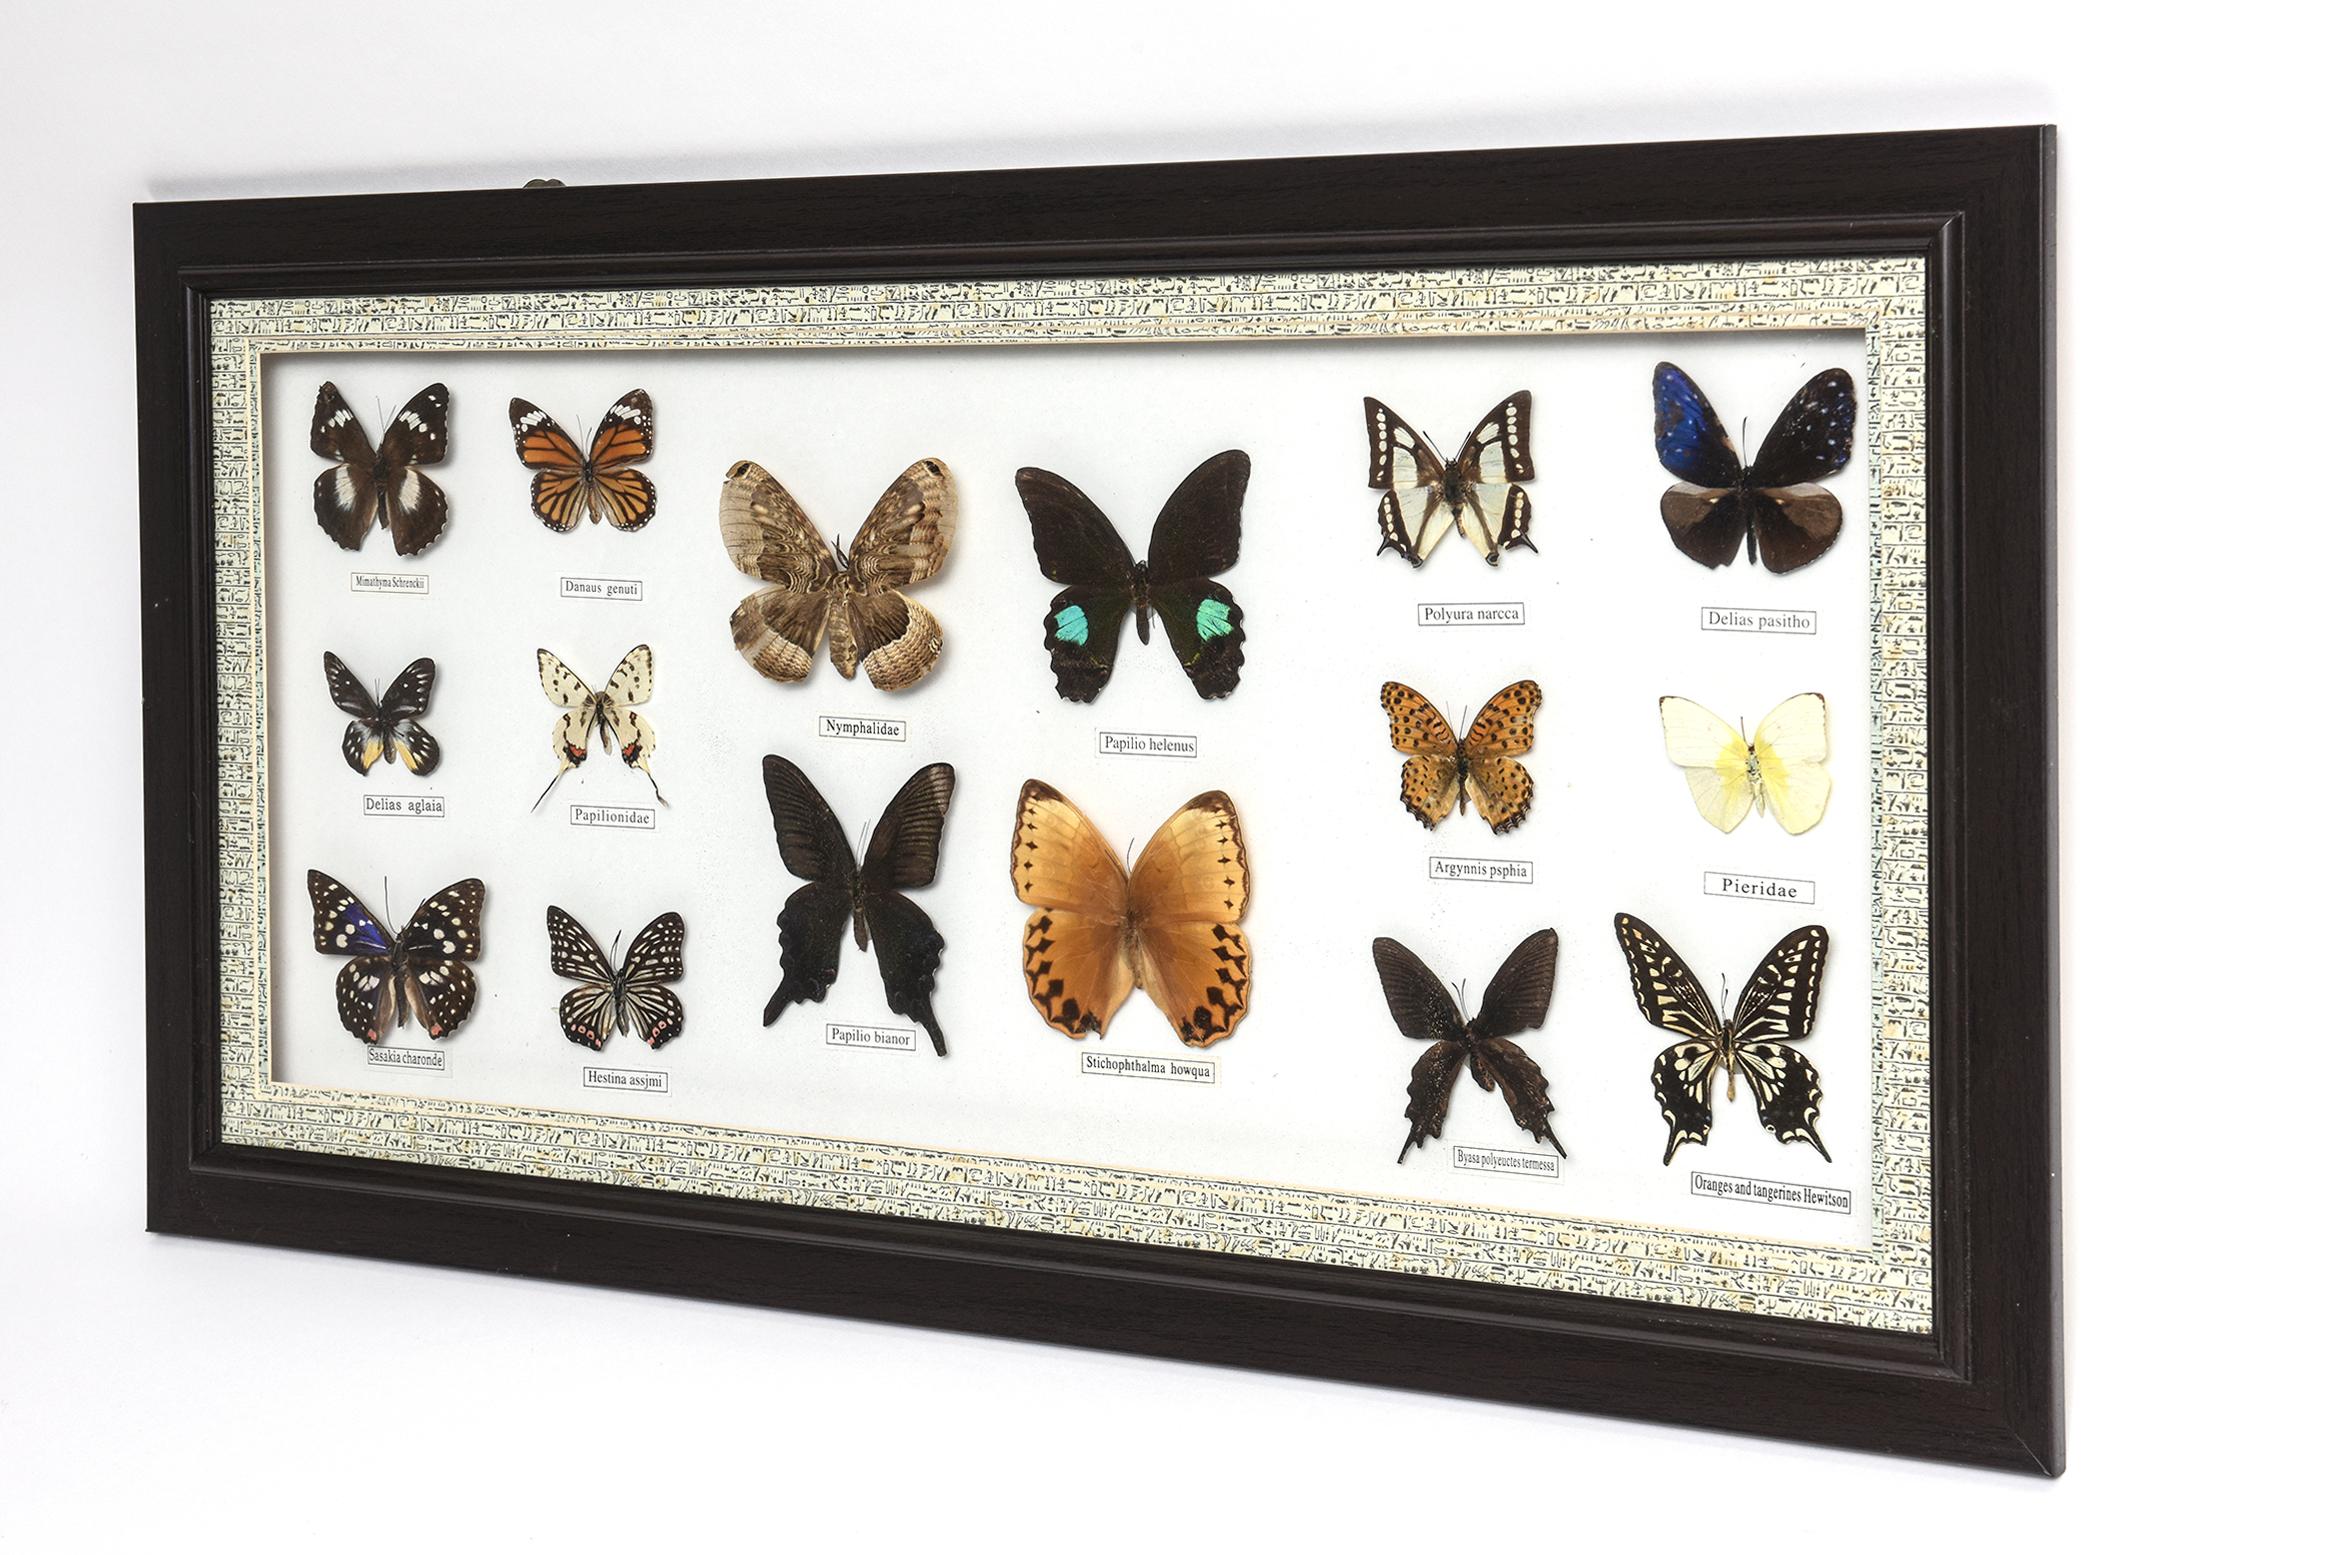 Framed butterfly collection featuring 16 butterflies with type of butterfly underneath each. Mounted in a shadowbox frame which was made in China.